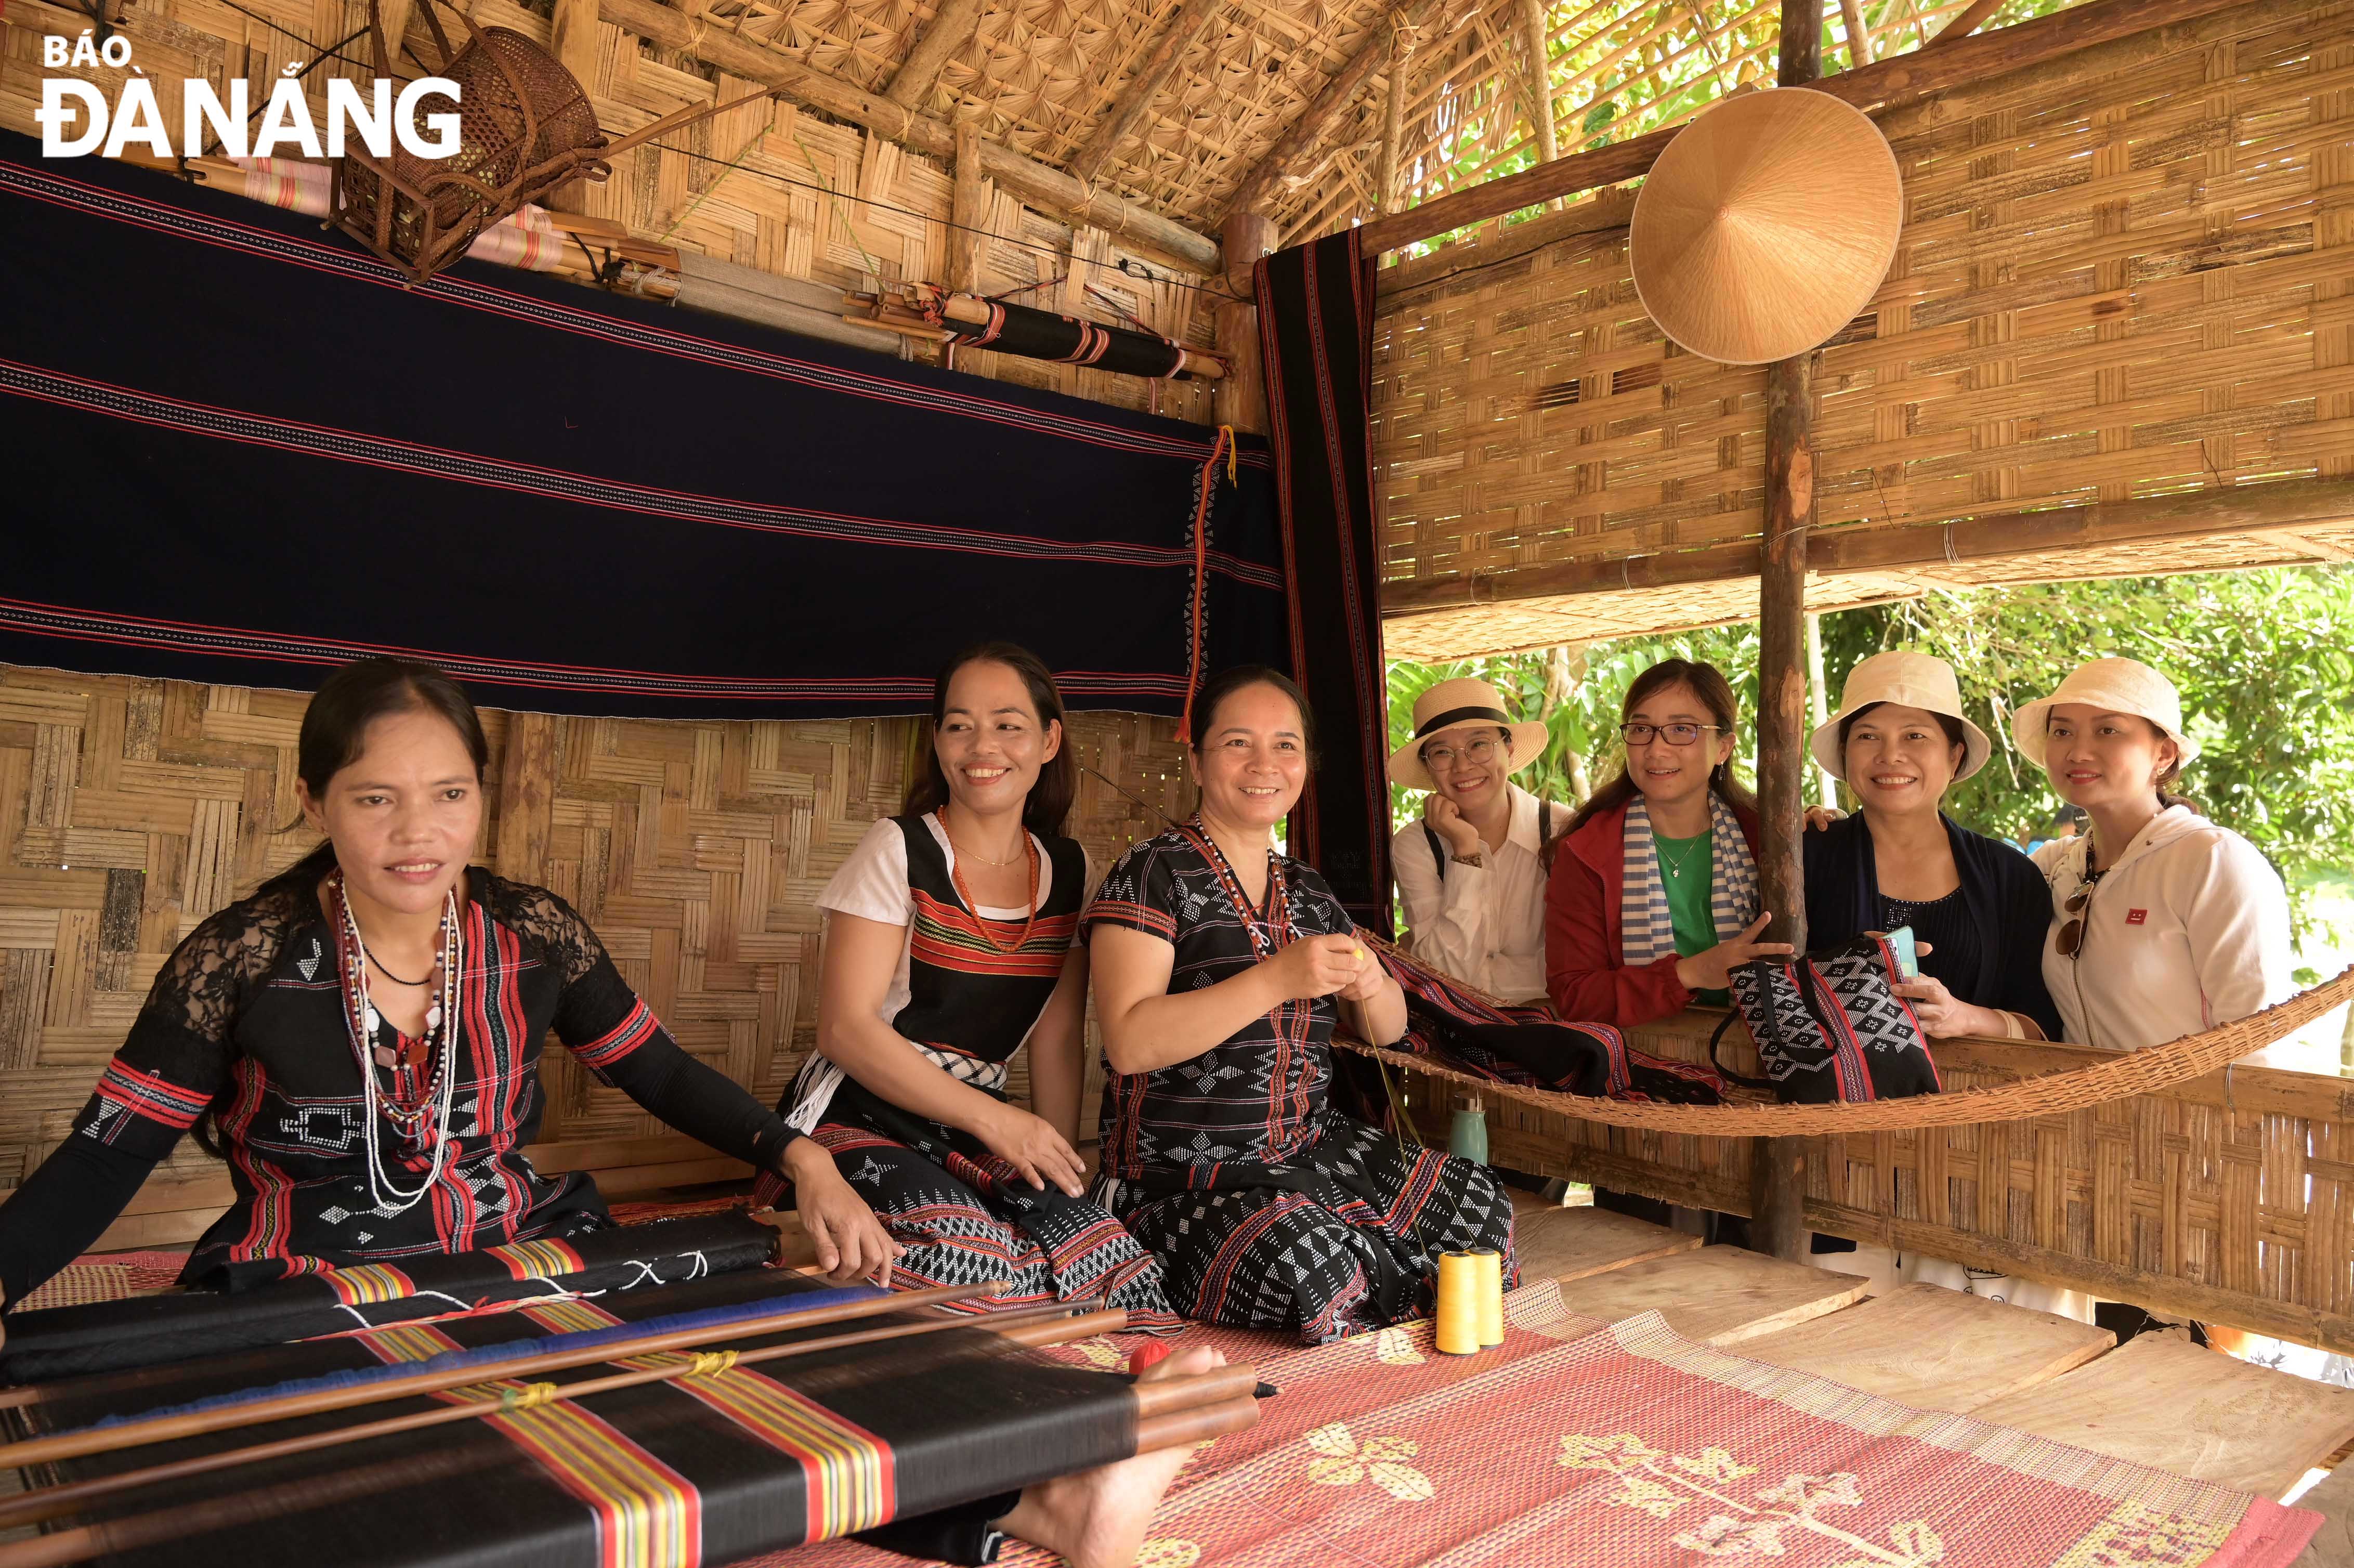 Apart from preserving local cultural heritage, the Hoa Bac Cooperative of Eco-Agriculture and Community-based Tourism has helped Co Tu ethnic minority women earn a steady income. Photo: TRAN TRUC